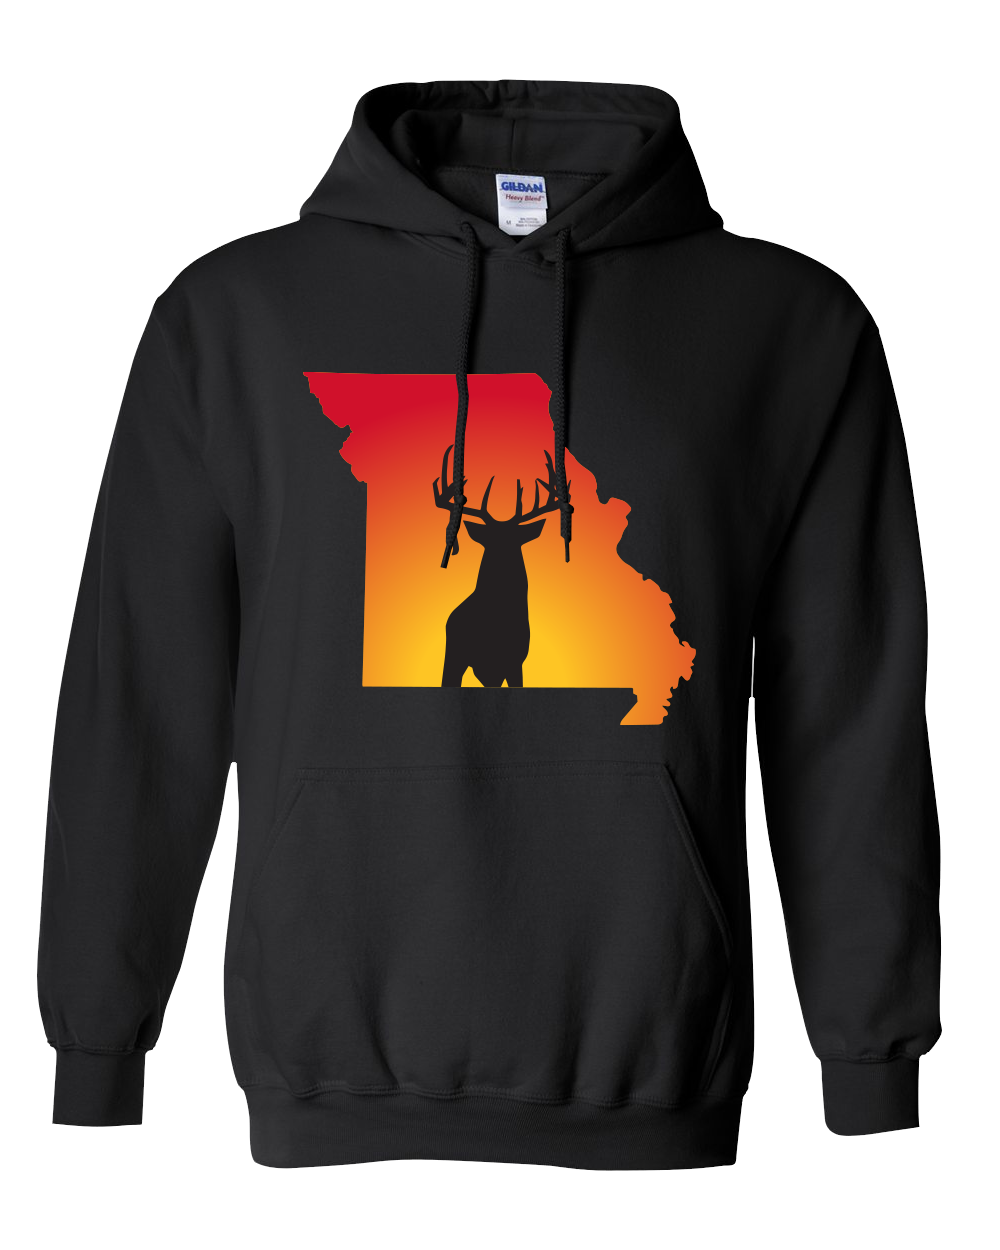 Pullover Hooded Sweatshirt Missouri Black Whitetail Deer Vibrant Design High Quality Tight Knit Ring Spun Low Maintenance Cotton Printed With The Newest Available Color Transfer Technology